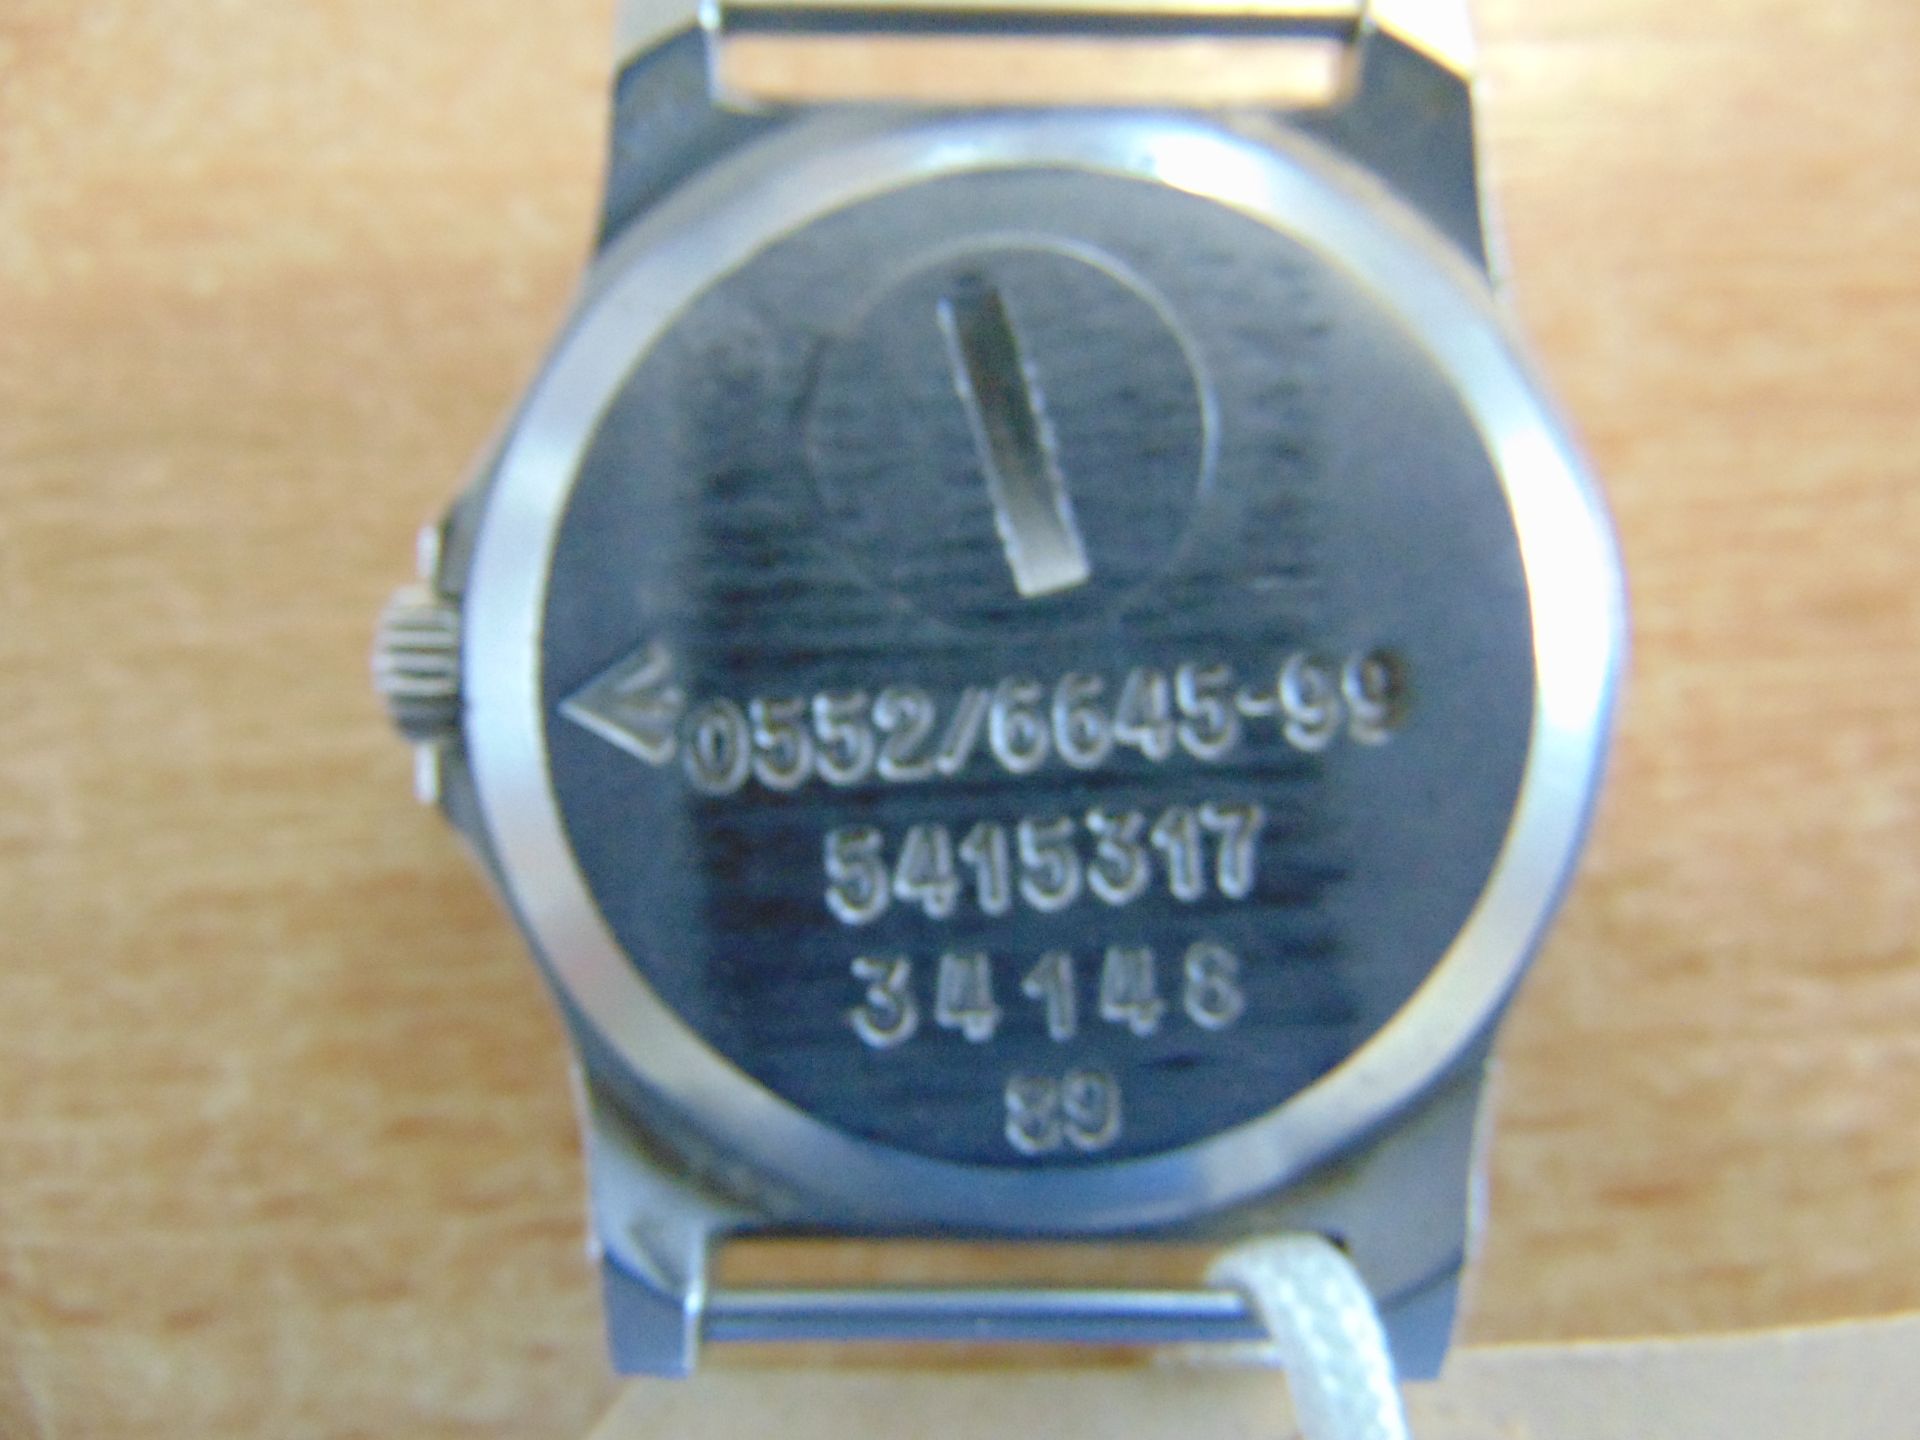 Rare CWC 0552 Royal Marines Issue Service Watch Nato Markings, Date 1989 - Image 3 of 3